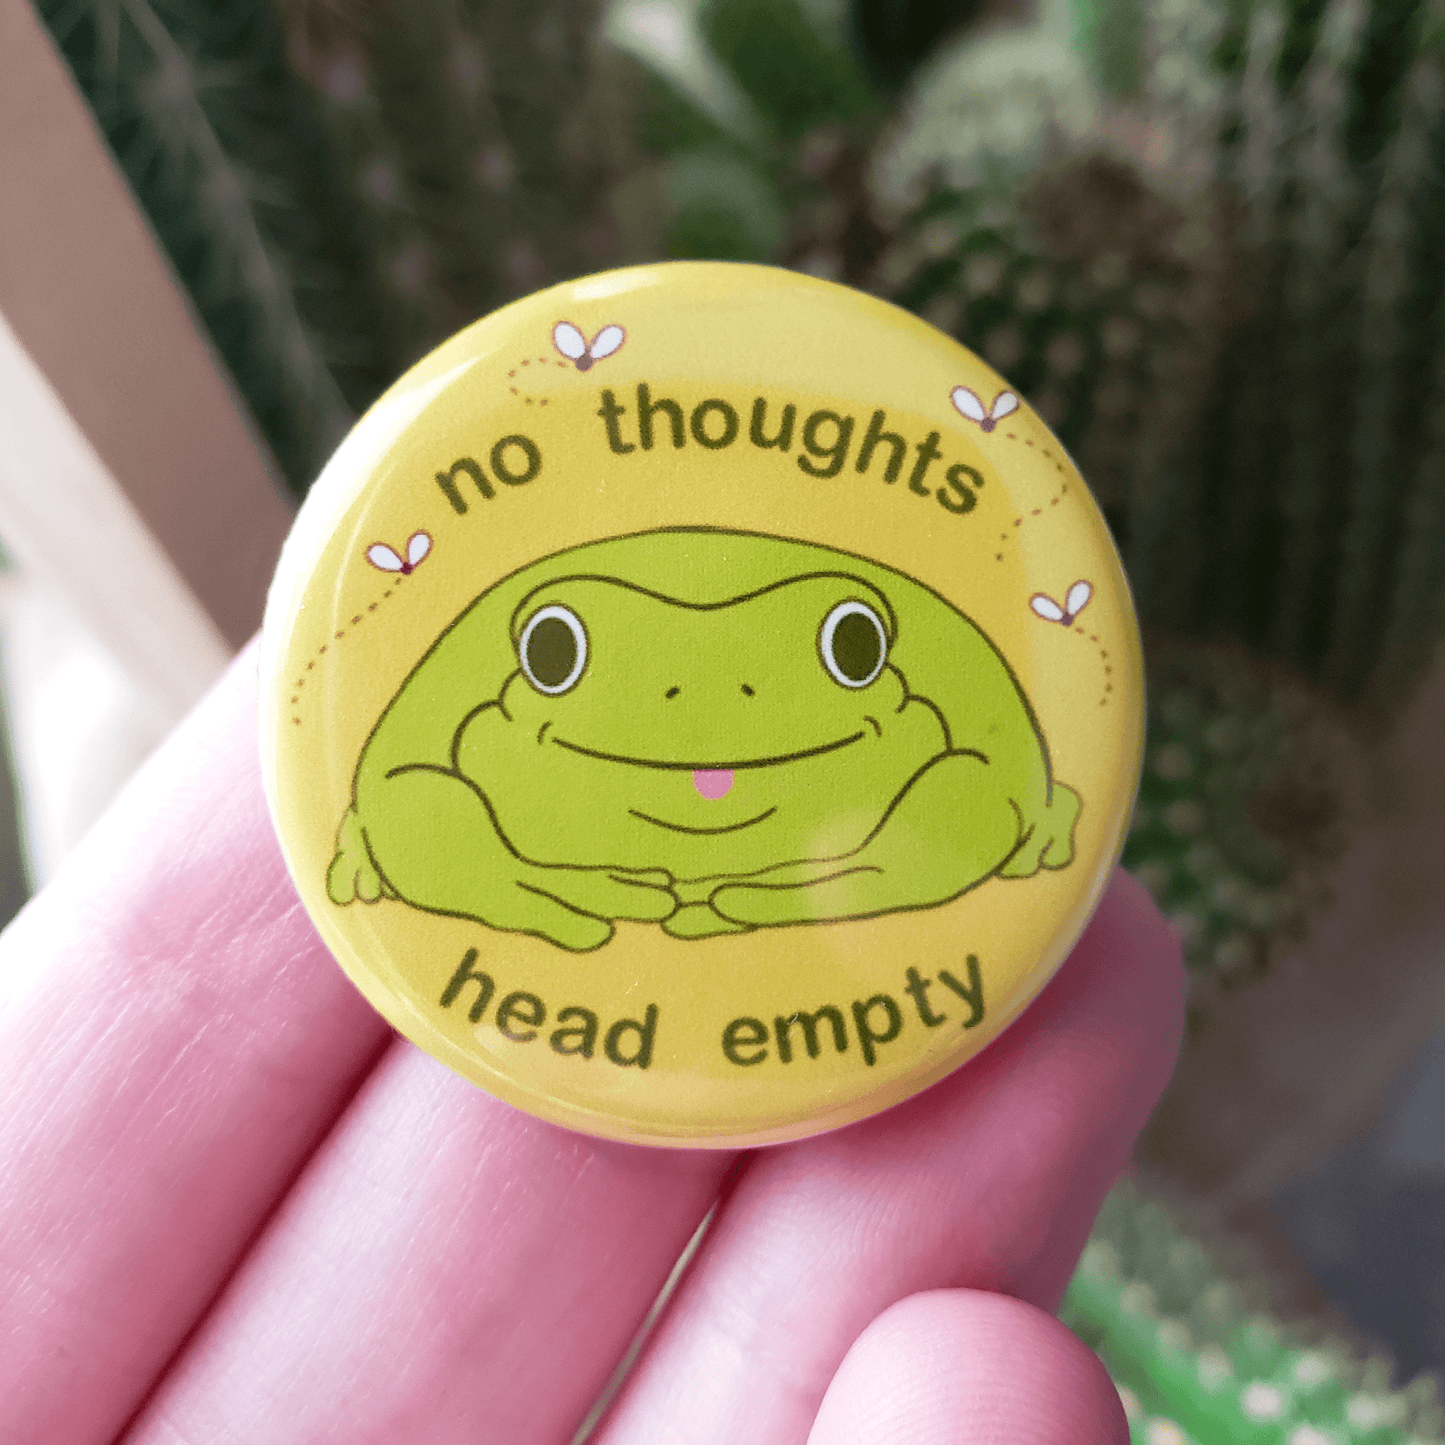 No thoughts, head empty Button